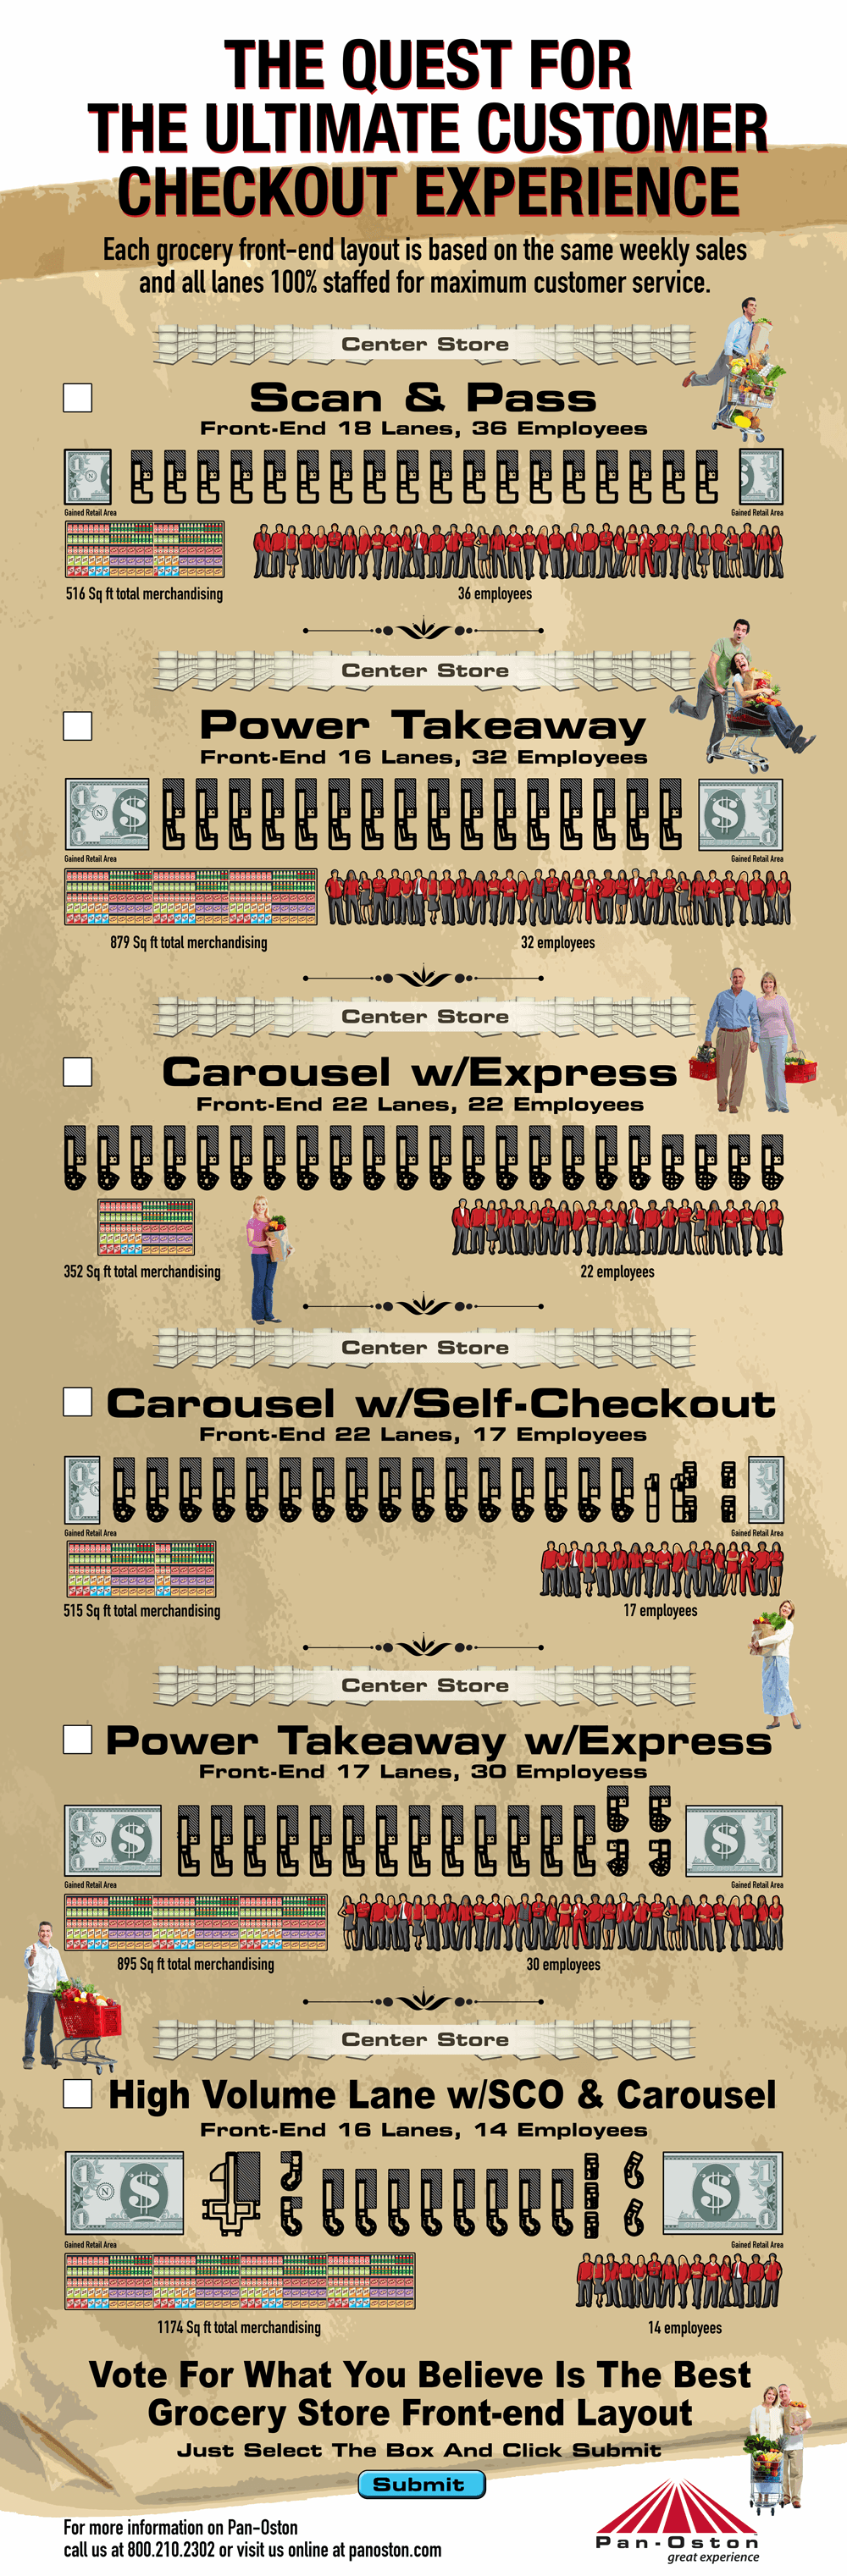 Customer Checkout-Experience